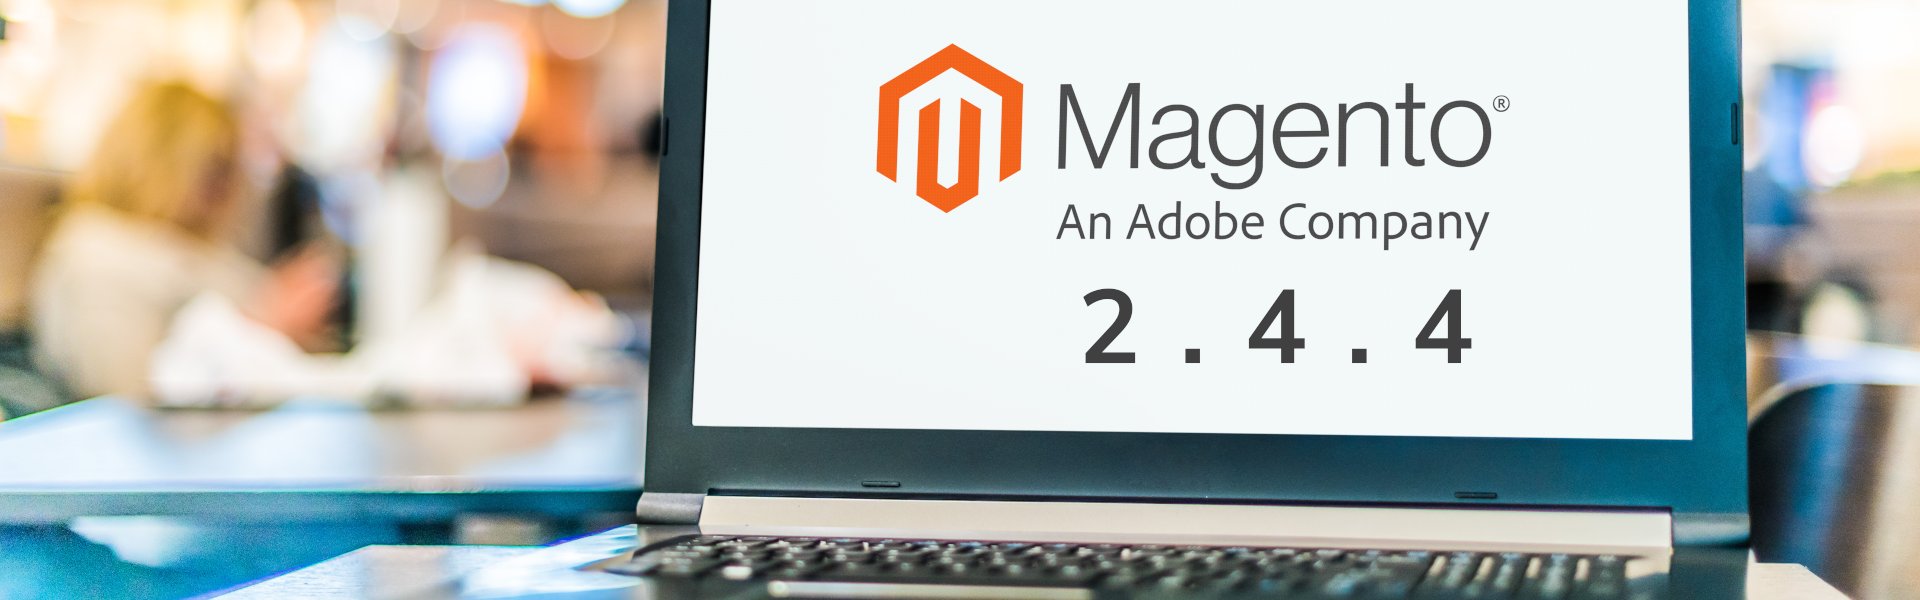 What's in Magento 2.4.4?